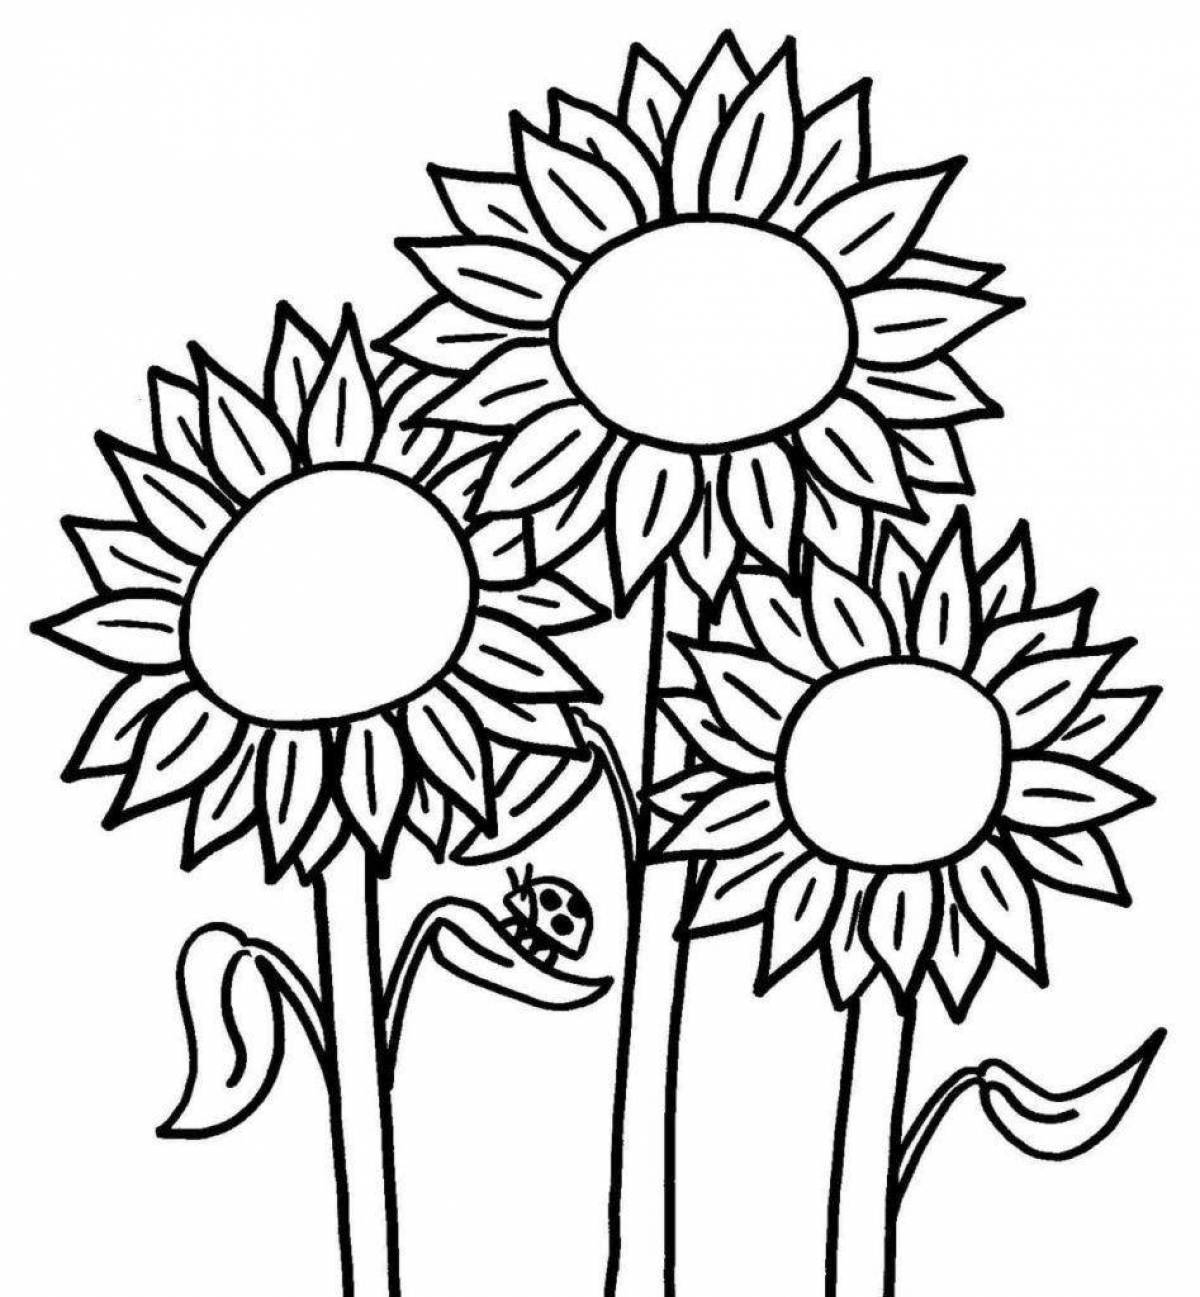 Fancy coloring sunflowers for kids